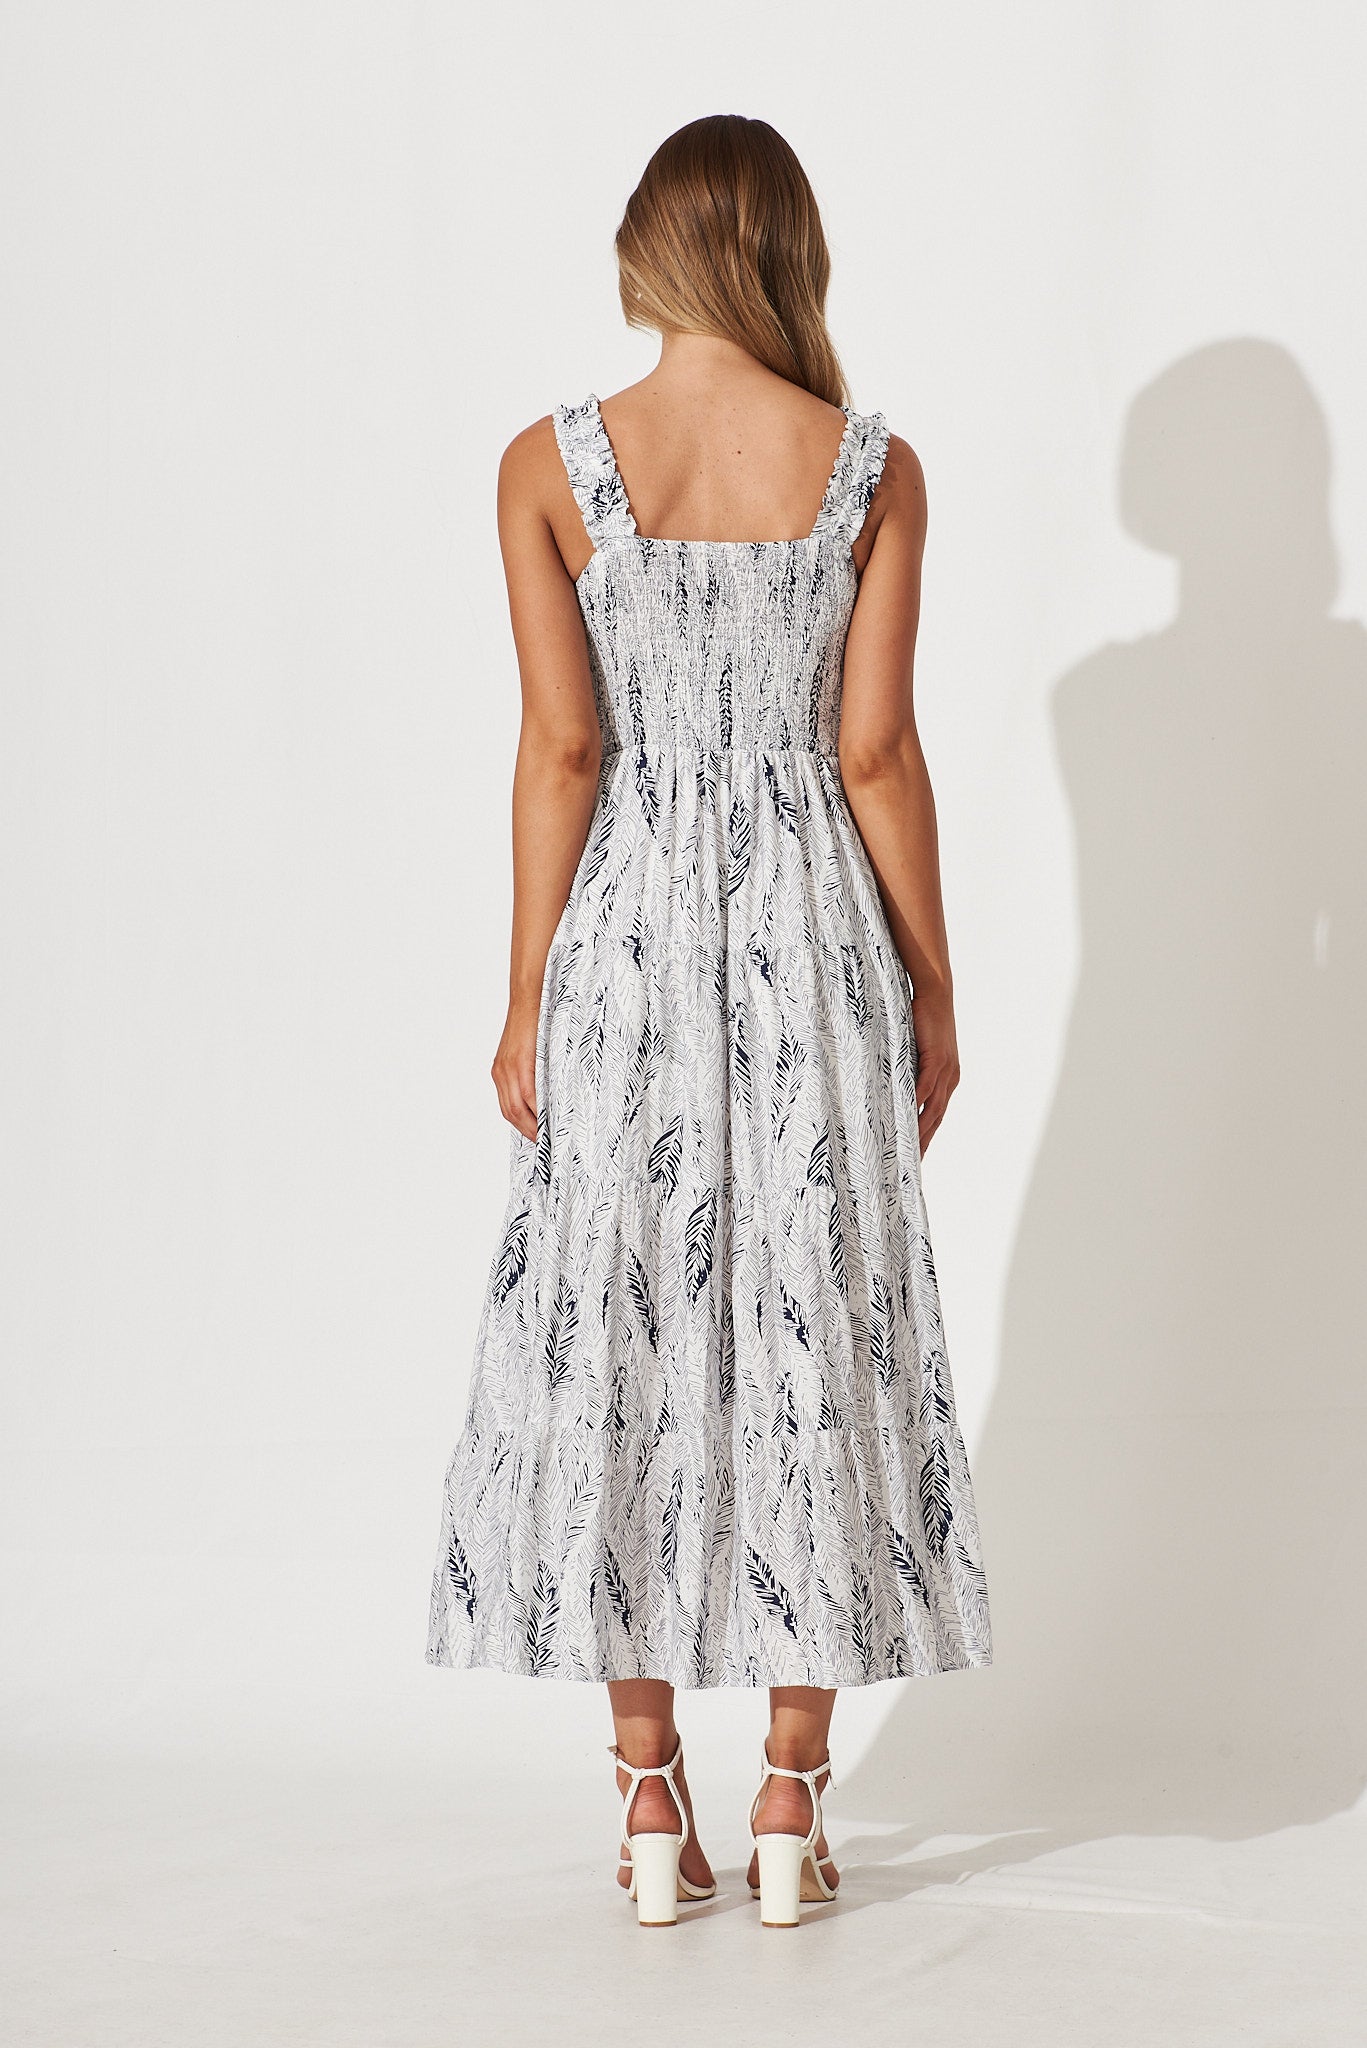 Seabrooke Maxi Sundress In White With Navy Leaf Print – St Frock